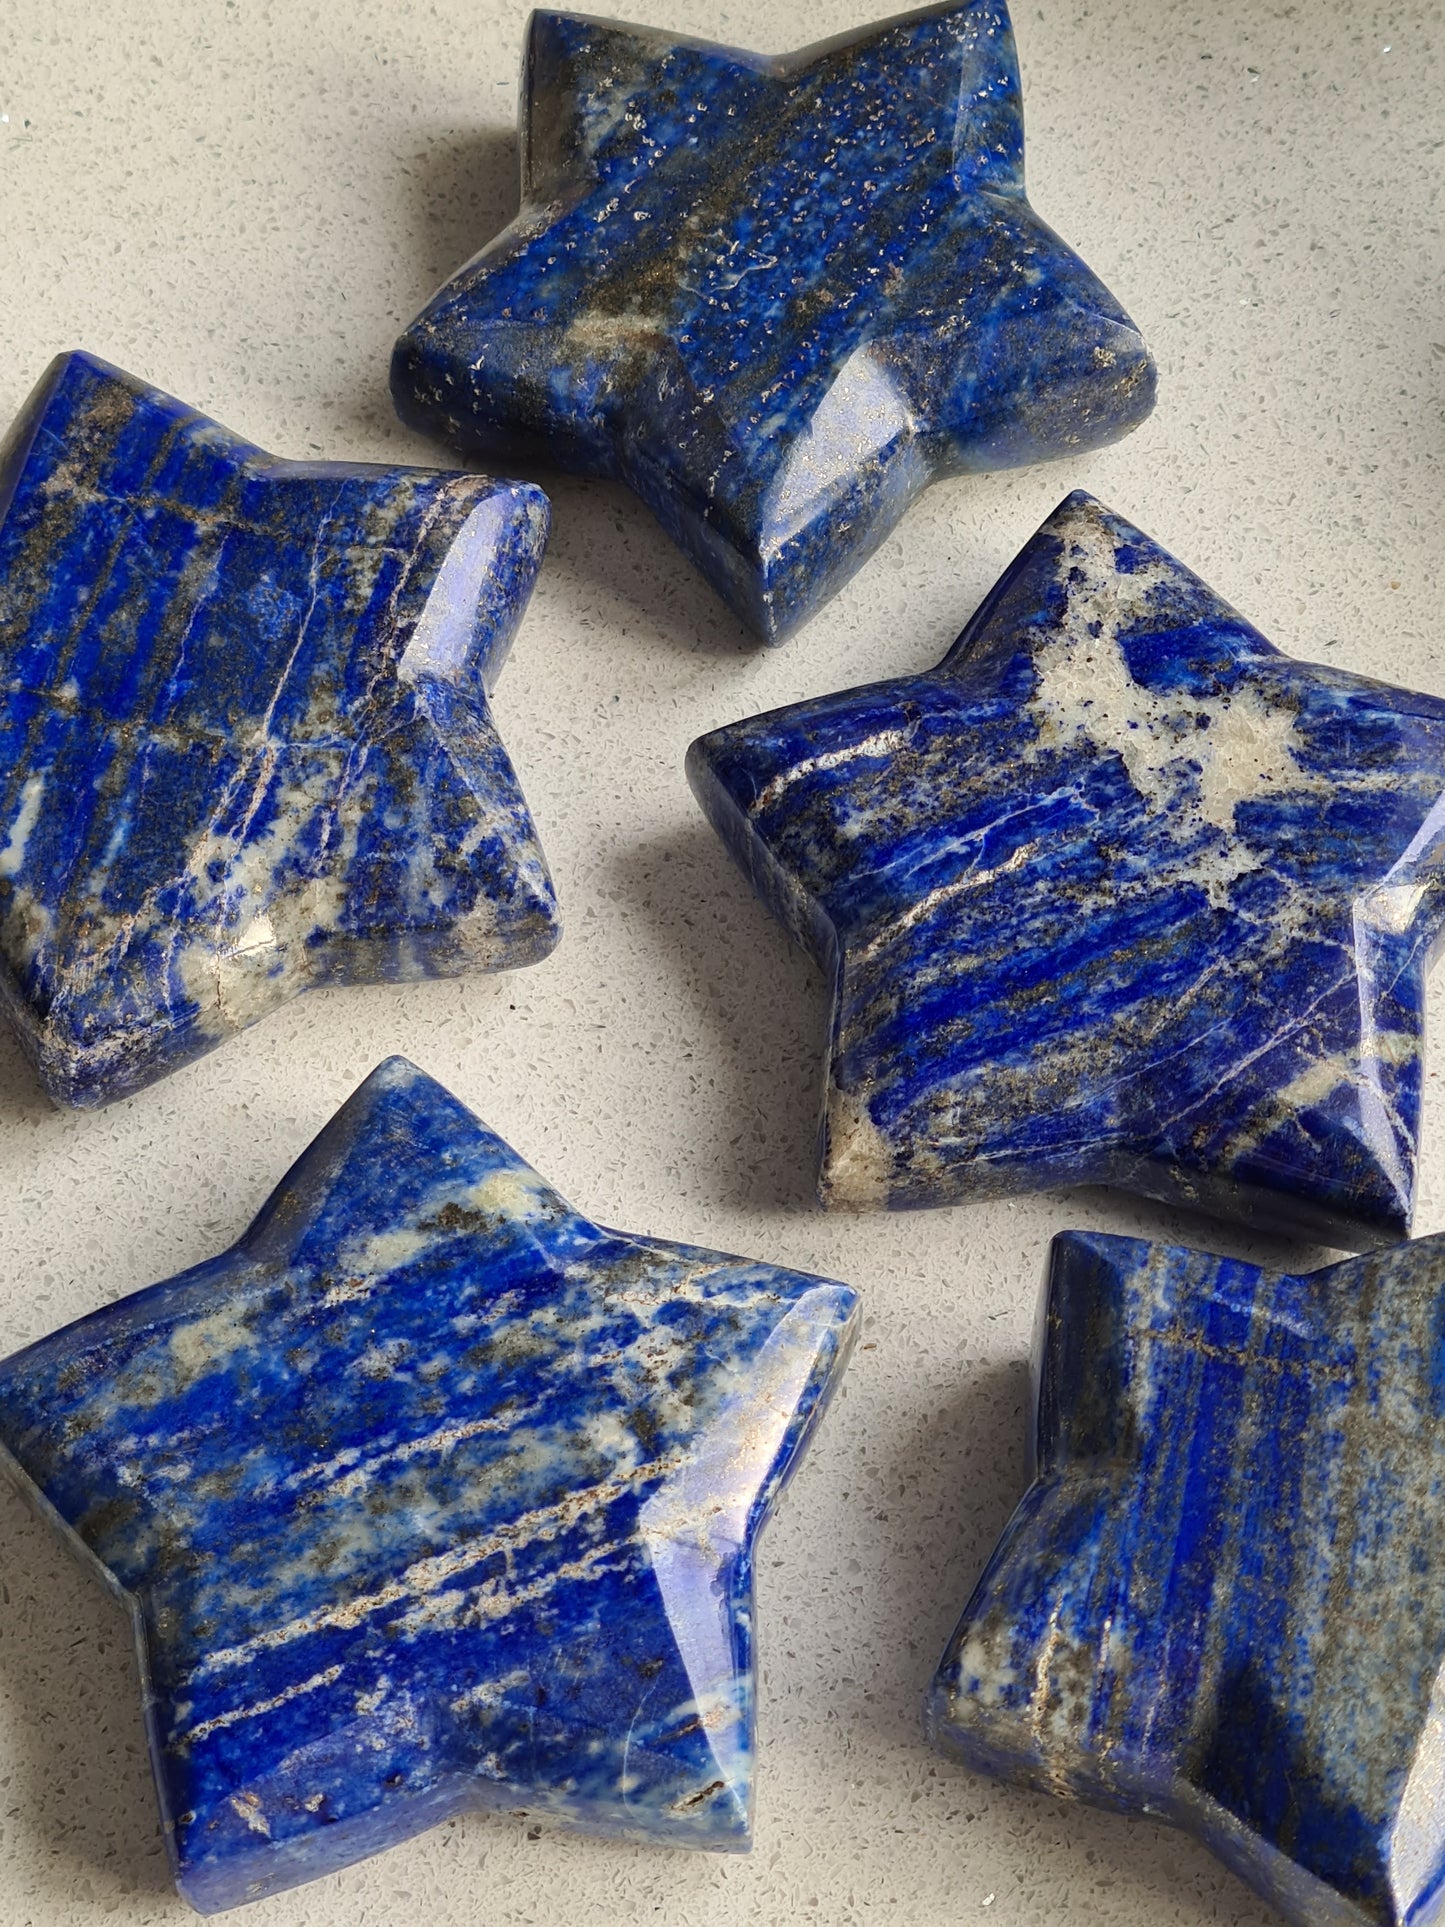 A group of vivid blue Lapis Lazuli Star carvings, with white calcite and pyrite inclusions